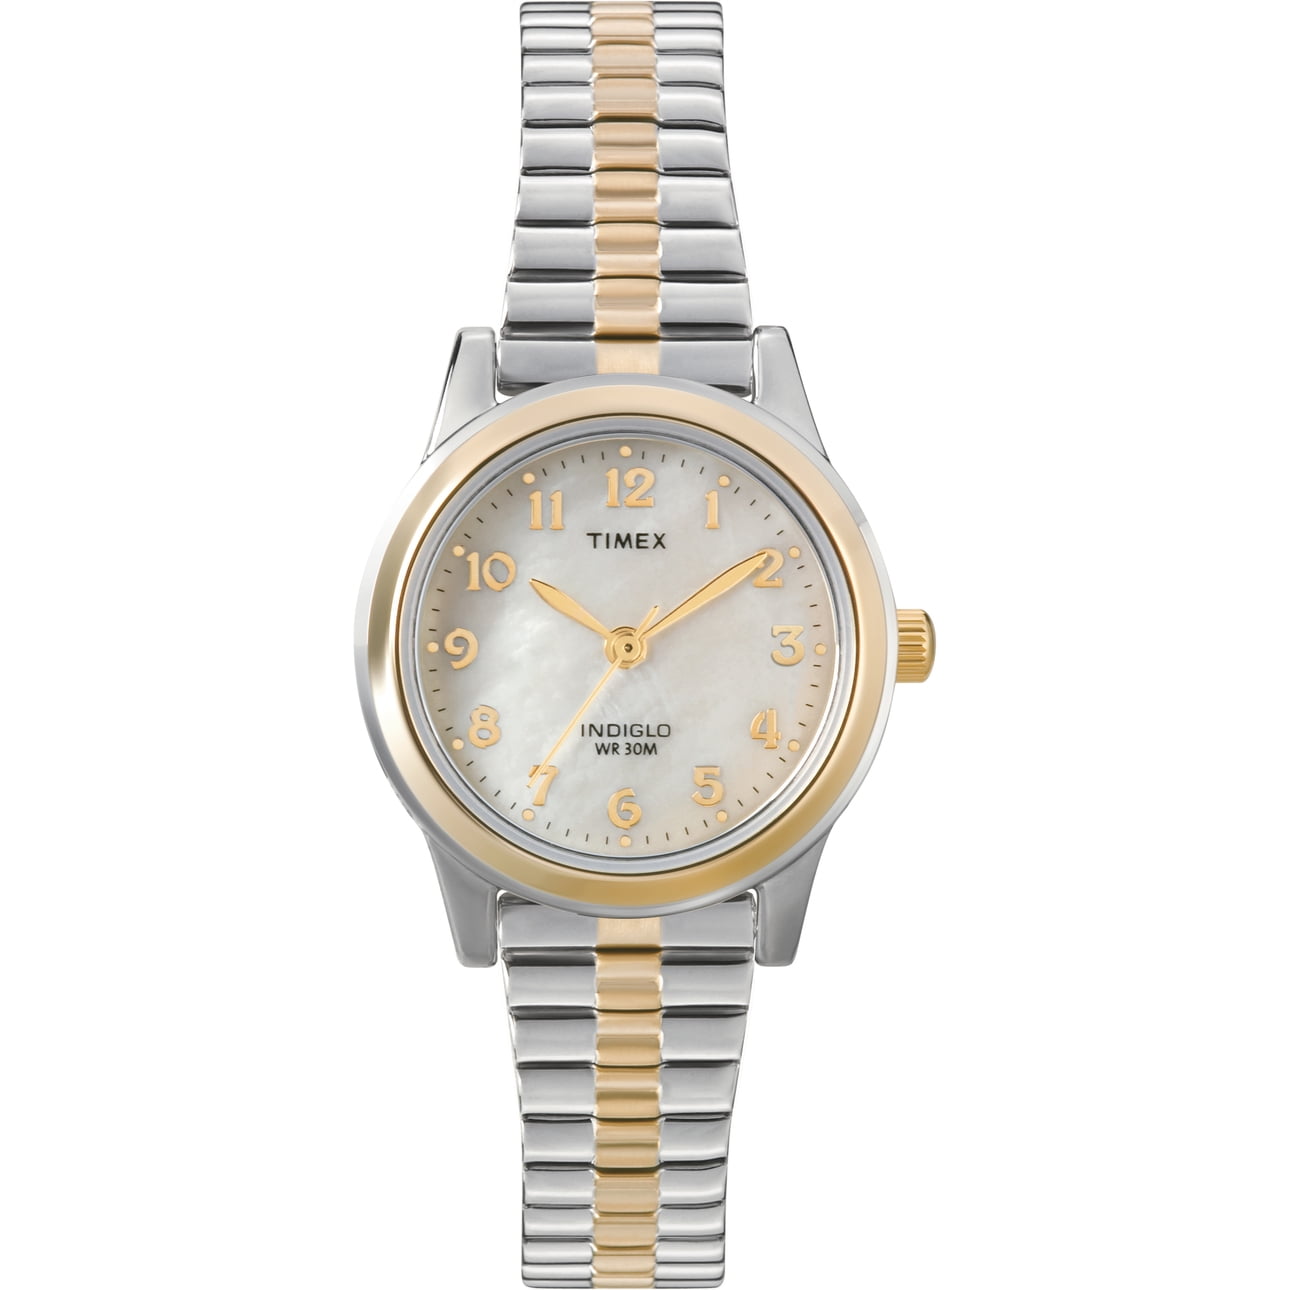 Timex Women's Essex Avenue Two-Tone/MOP 25mm Dress Watch, Extra-Long Expansion Band